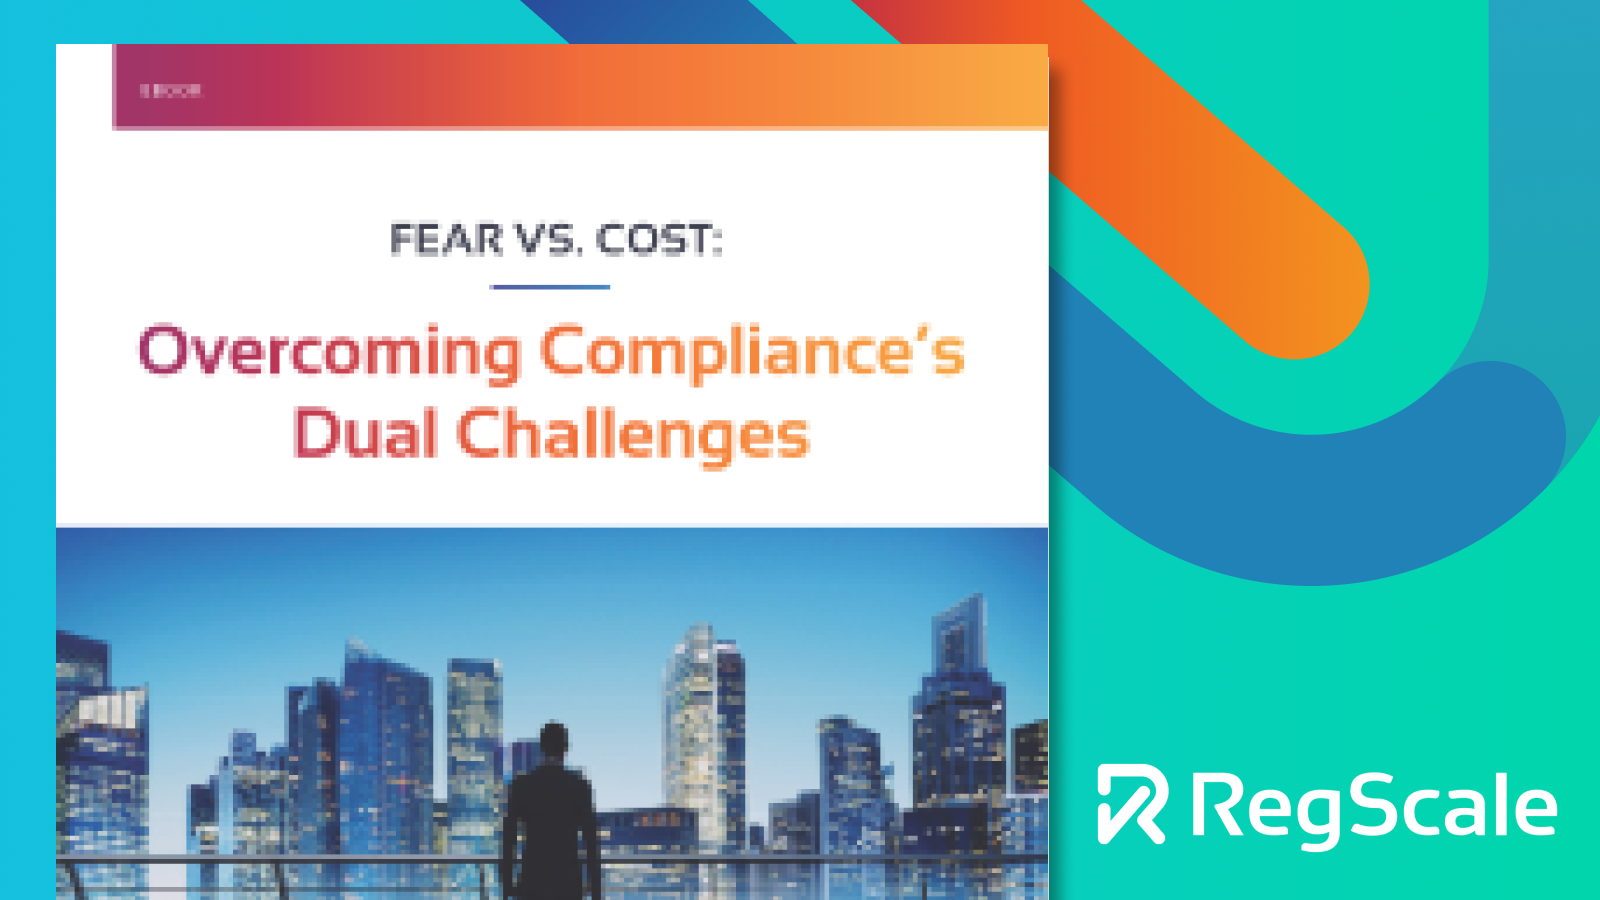 Fear vs. Cost: Overcoming Compliance Dual Challenges